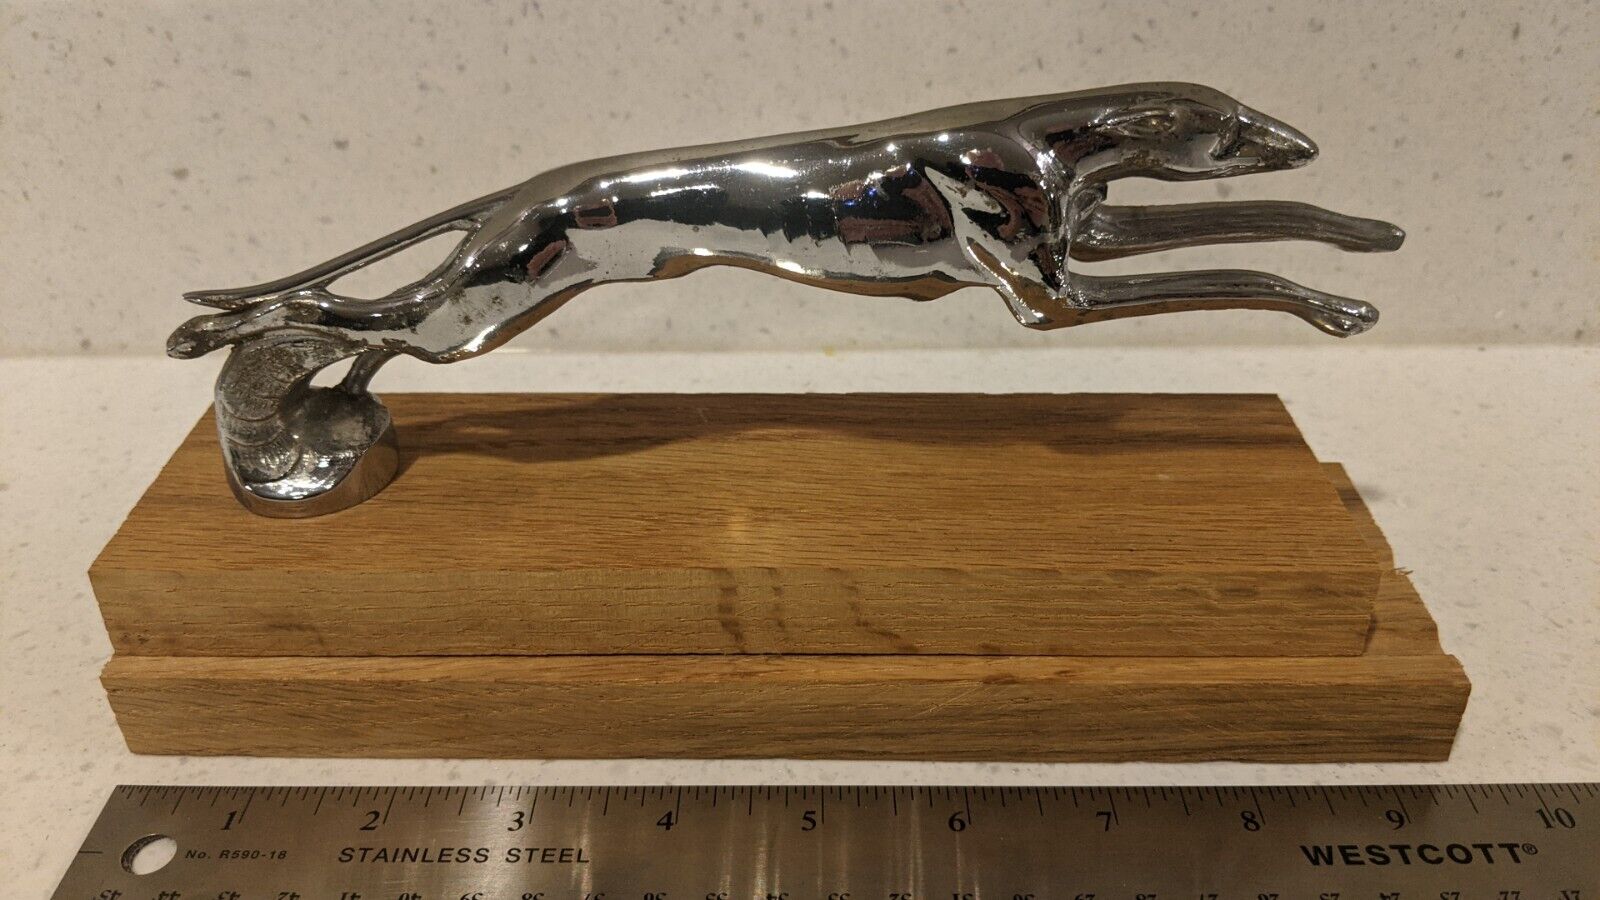 Ford Lincoln Greyhound Hood Ornament 1933 1934 Vintage 3 Window Coupe Dog OEM